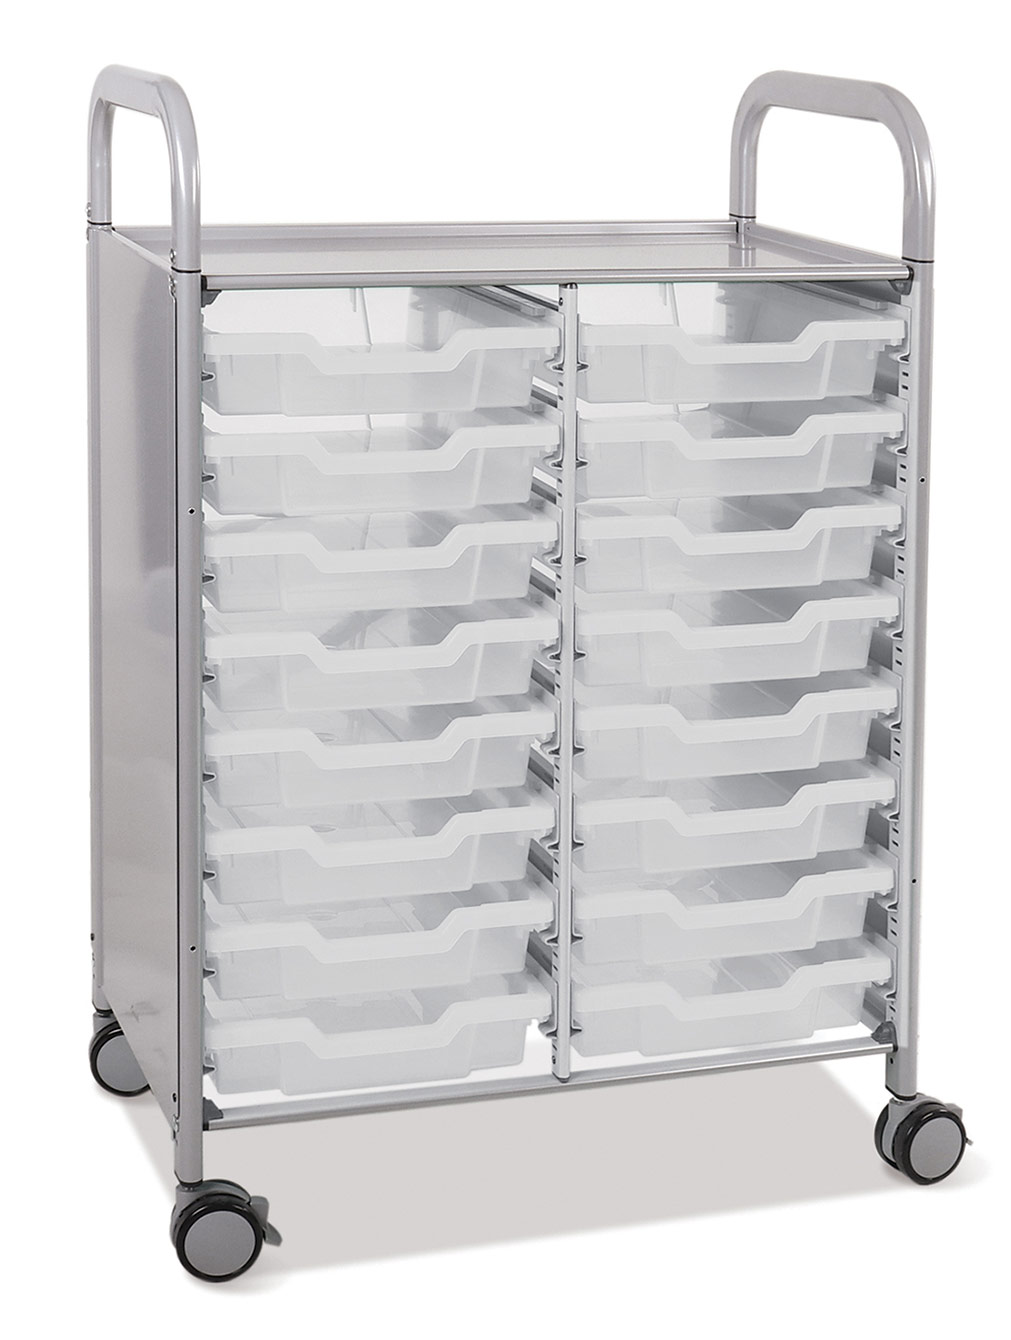 Callero Plus Shield Double Gratnells Trays Shallow 16 Trolley 